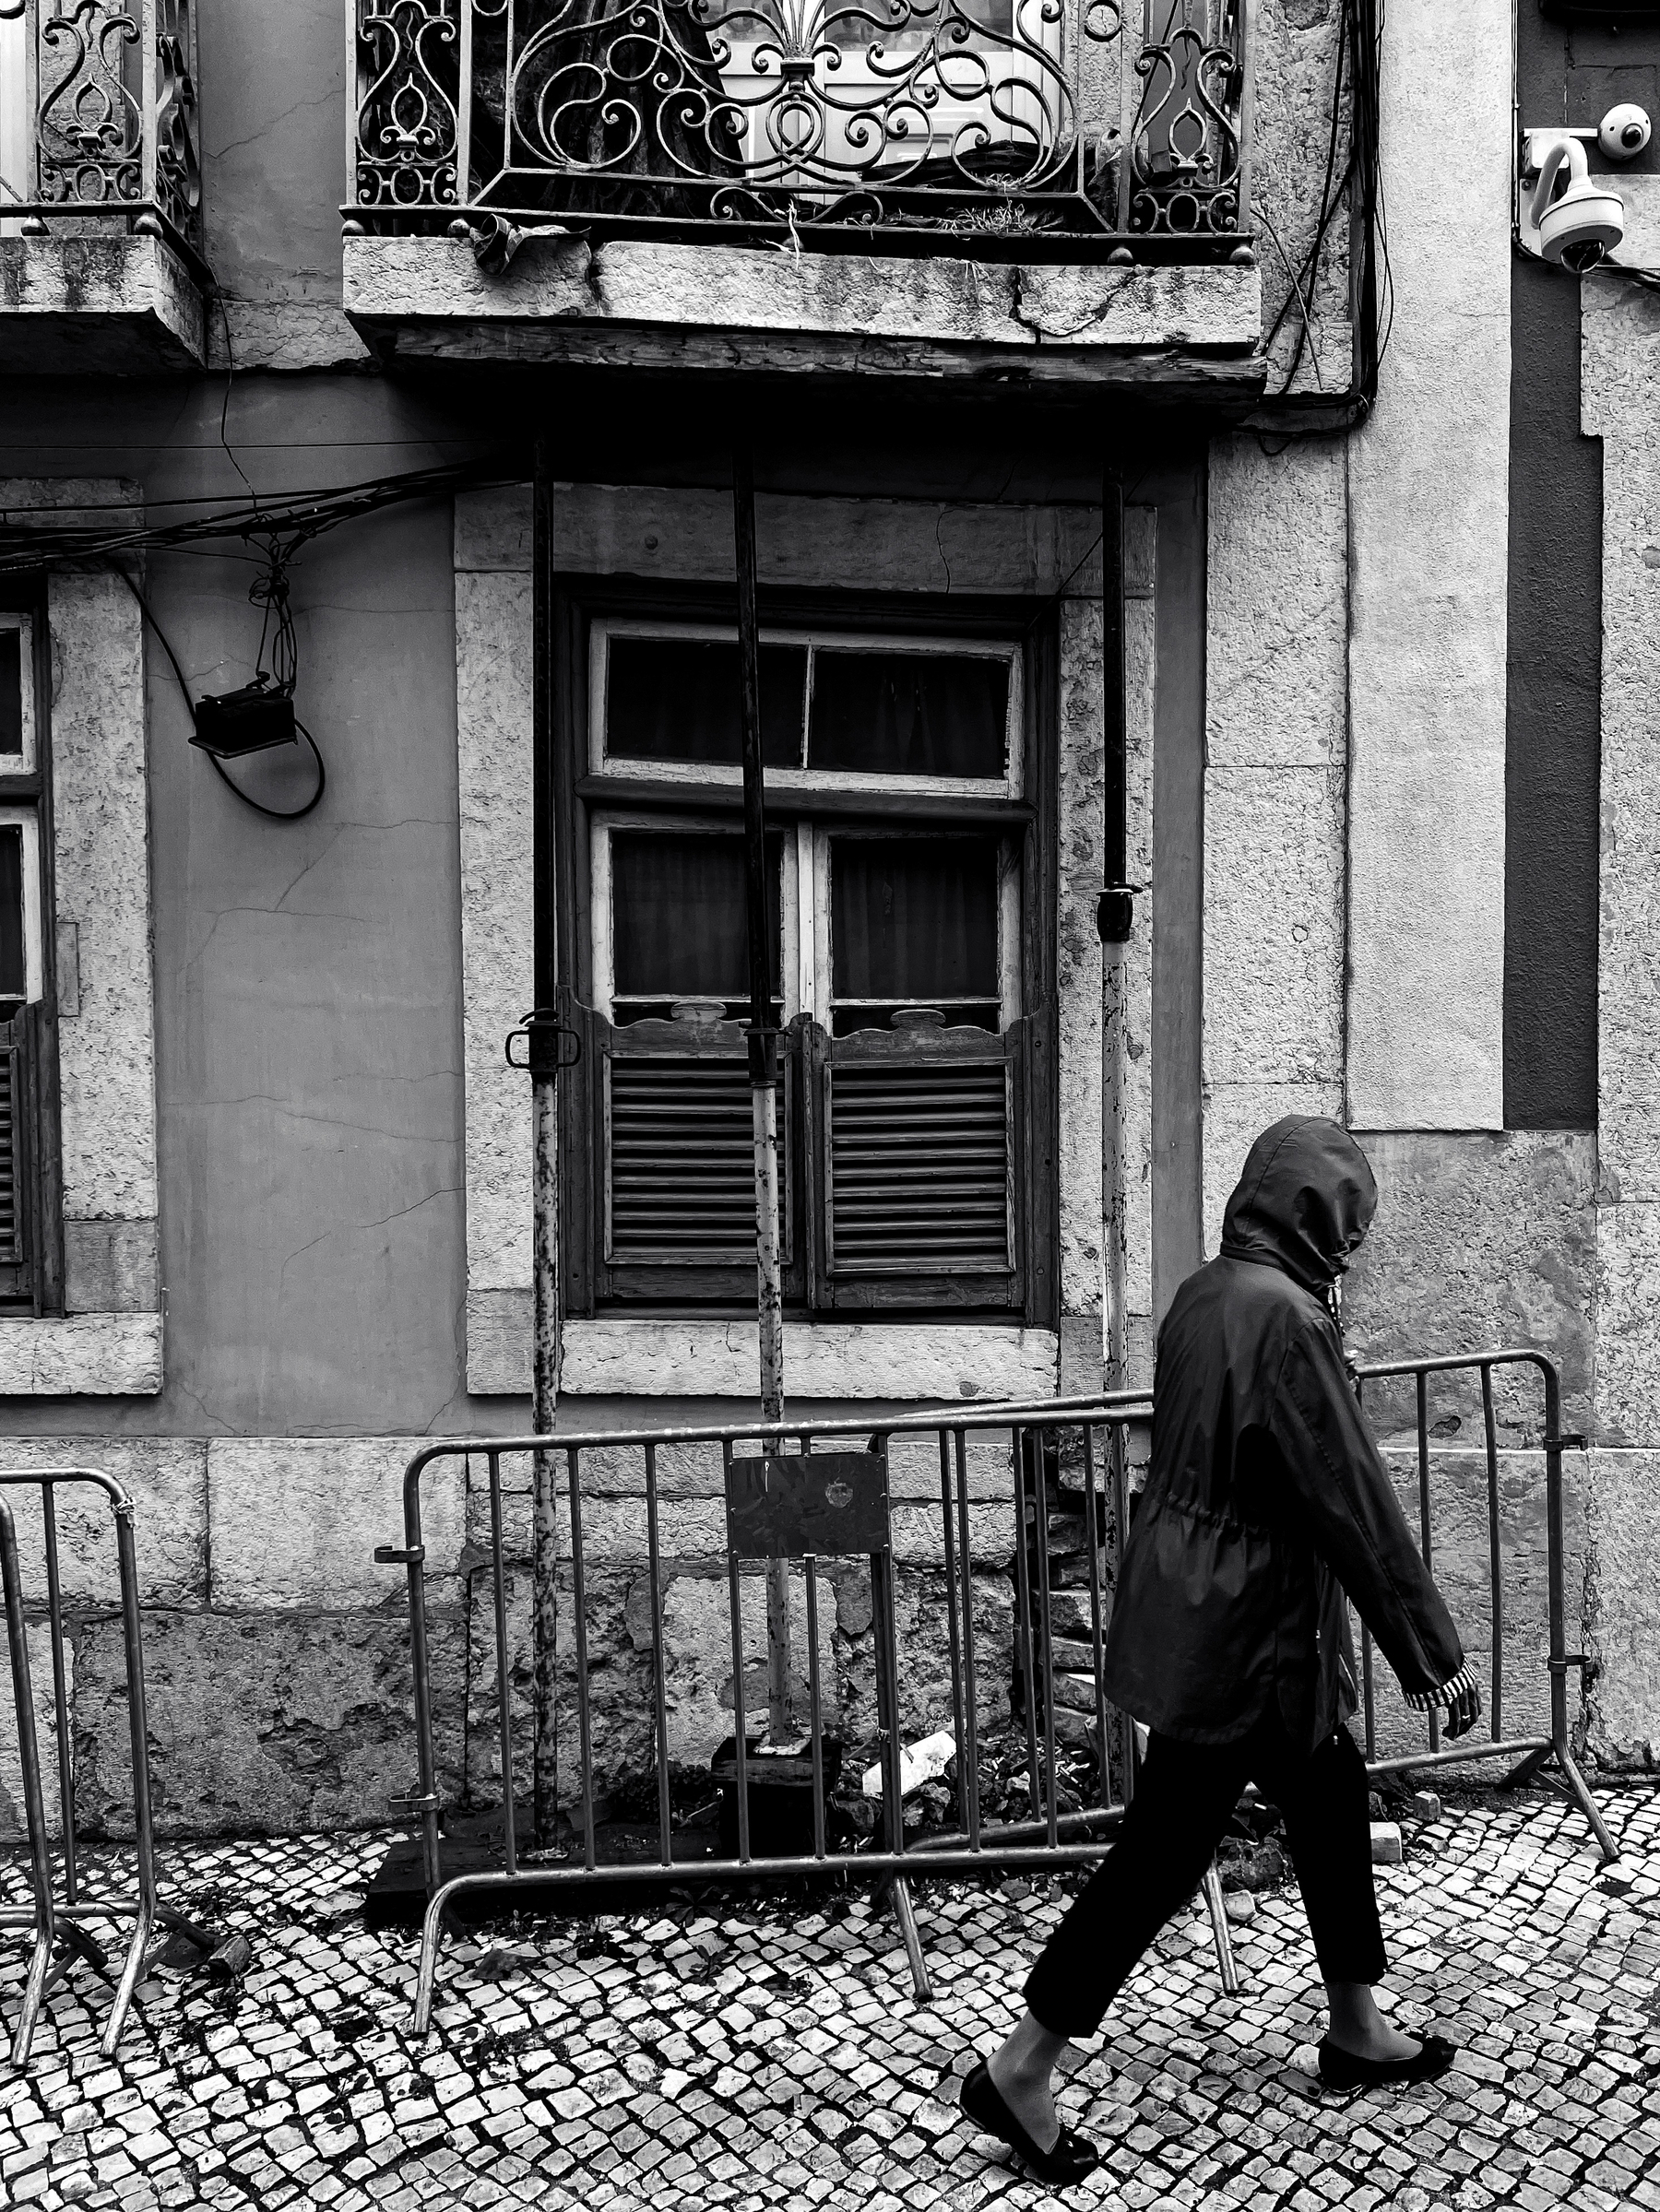 black and white photo of a person walking by a building that is derelict, almost collapsing.